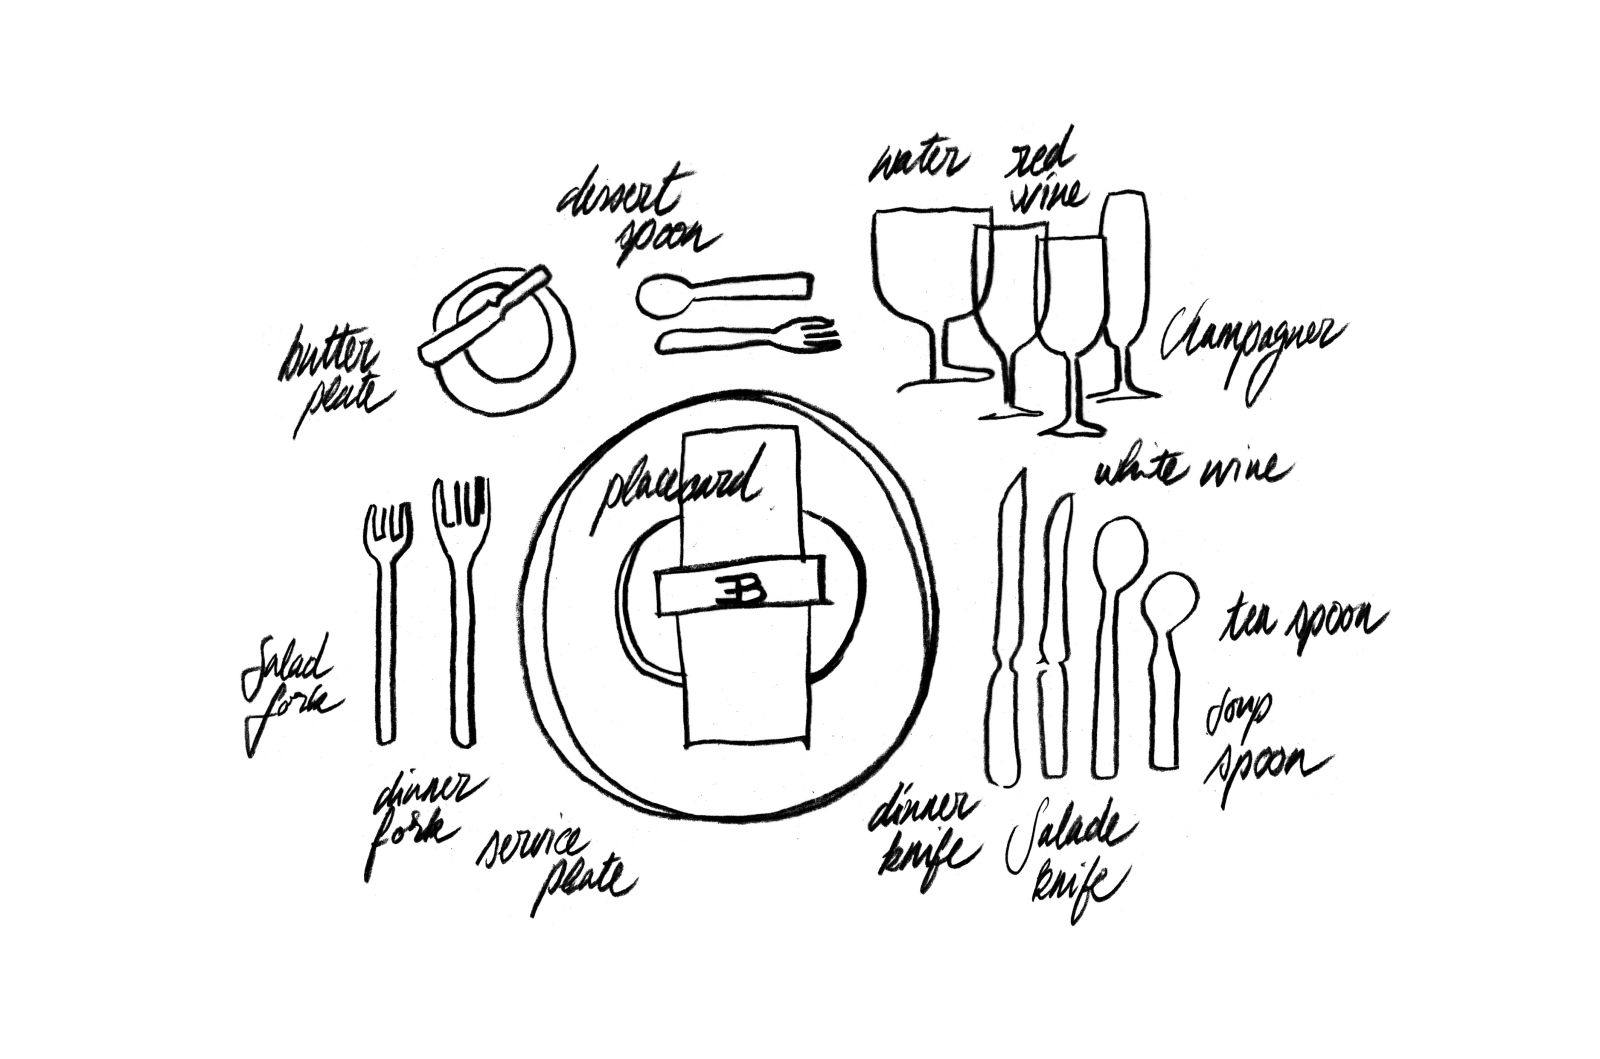 Arrangement of the table setting inspired by an original Ettore Bugatti hand sketch.